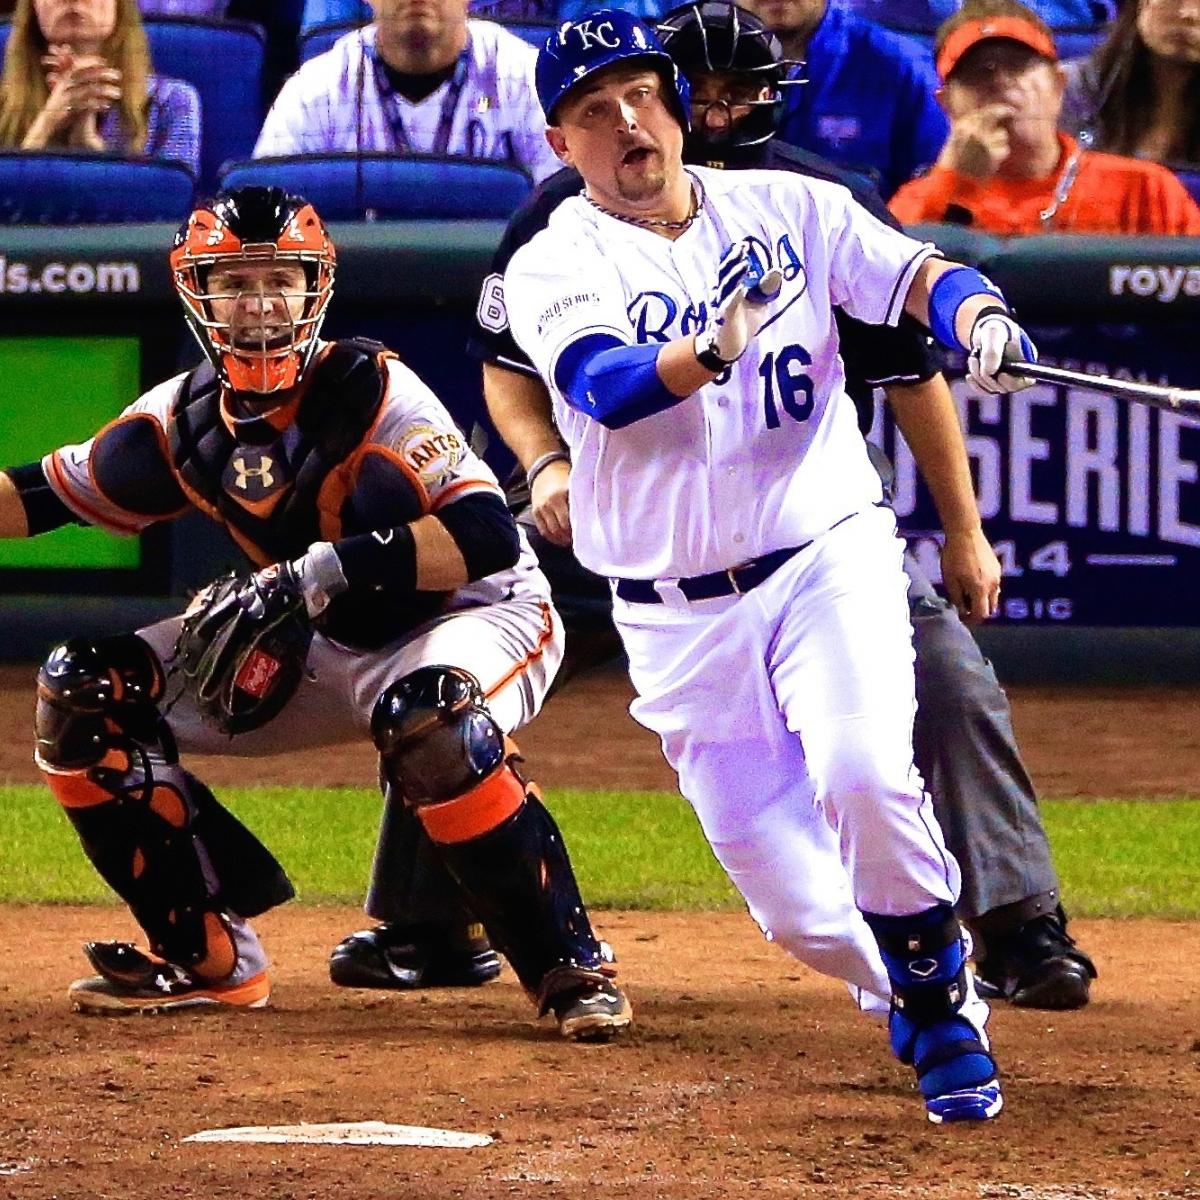 Sf Giants Vs Kc Royals Keys For Each Team To Win World Series Game 6 News Scores